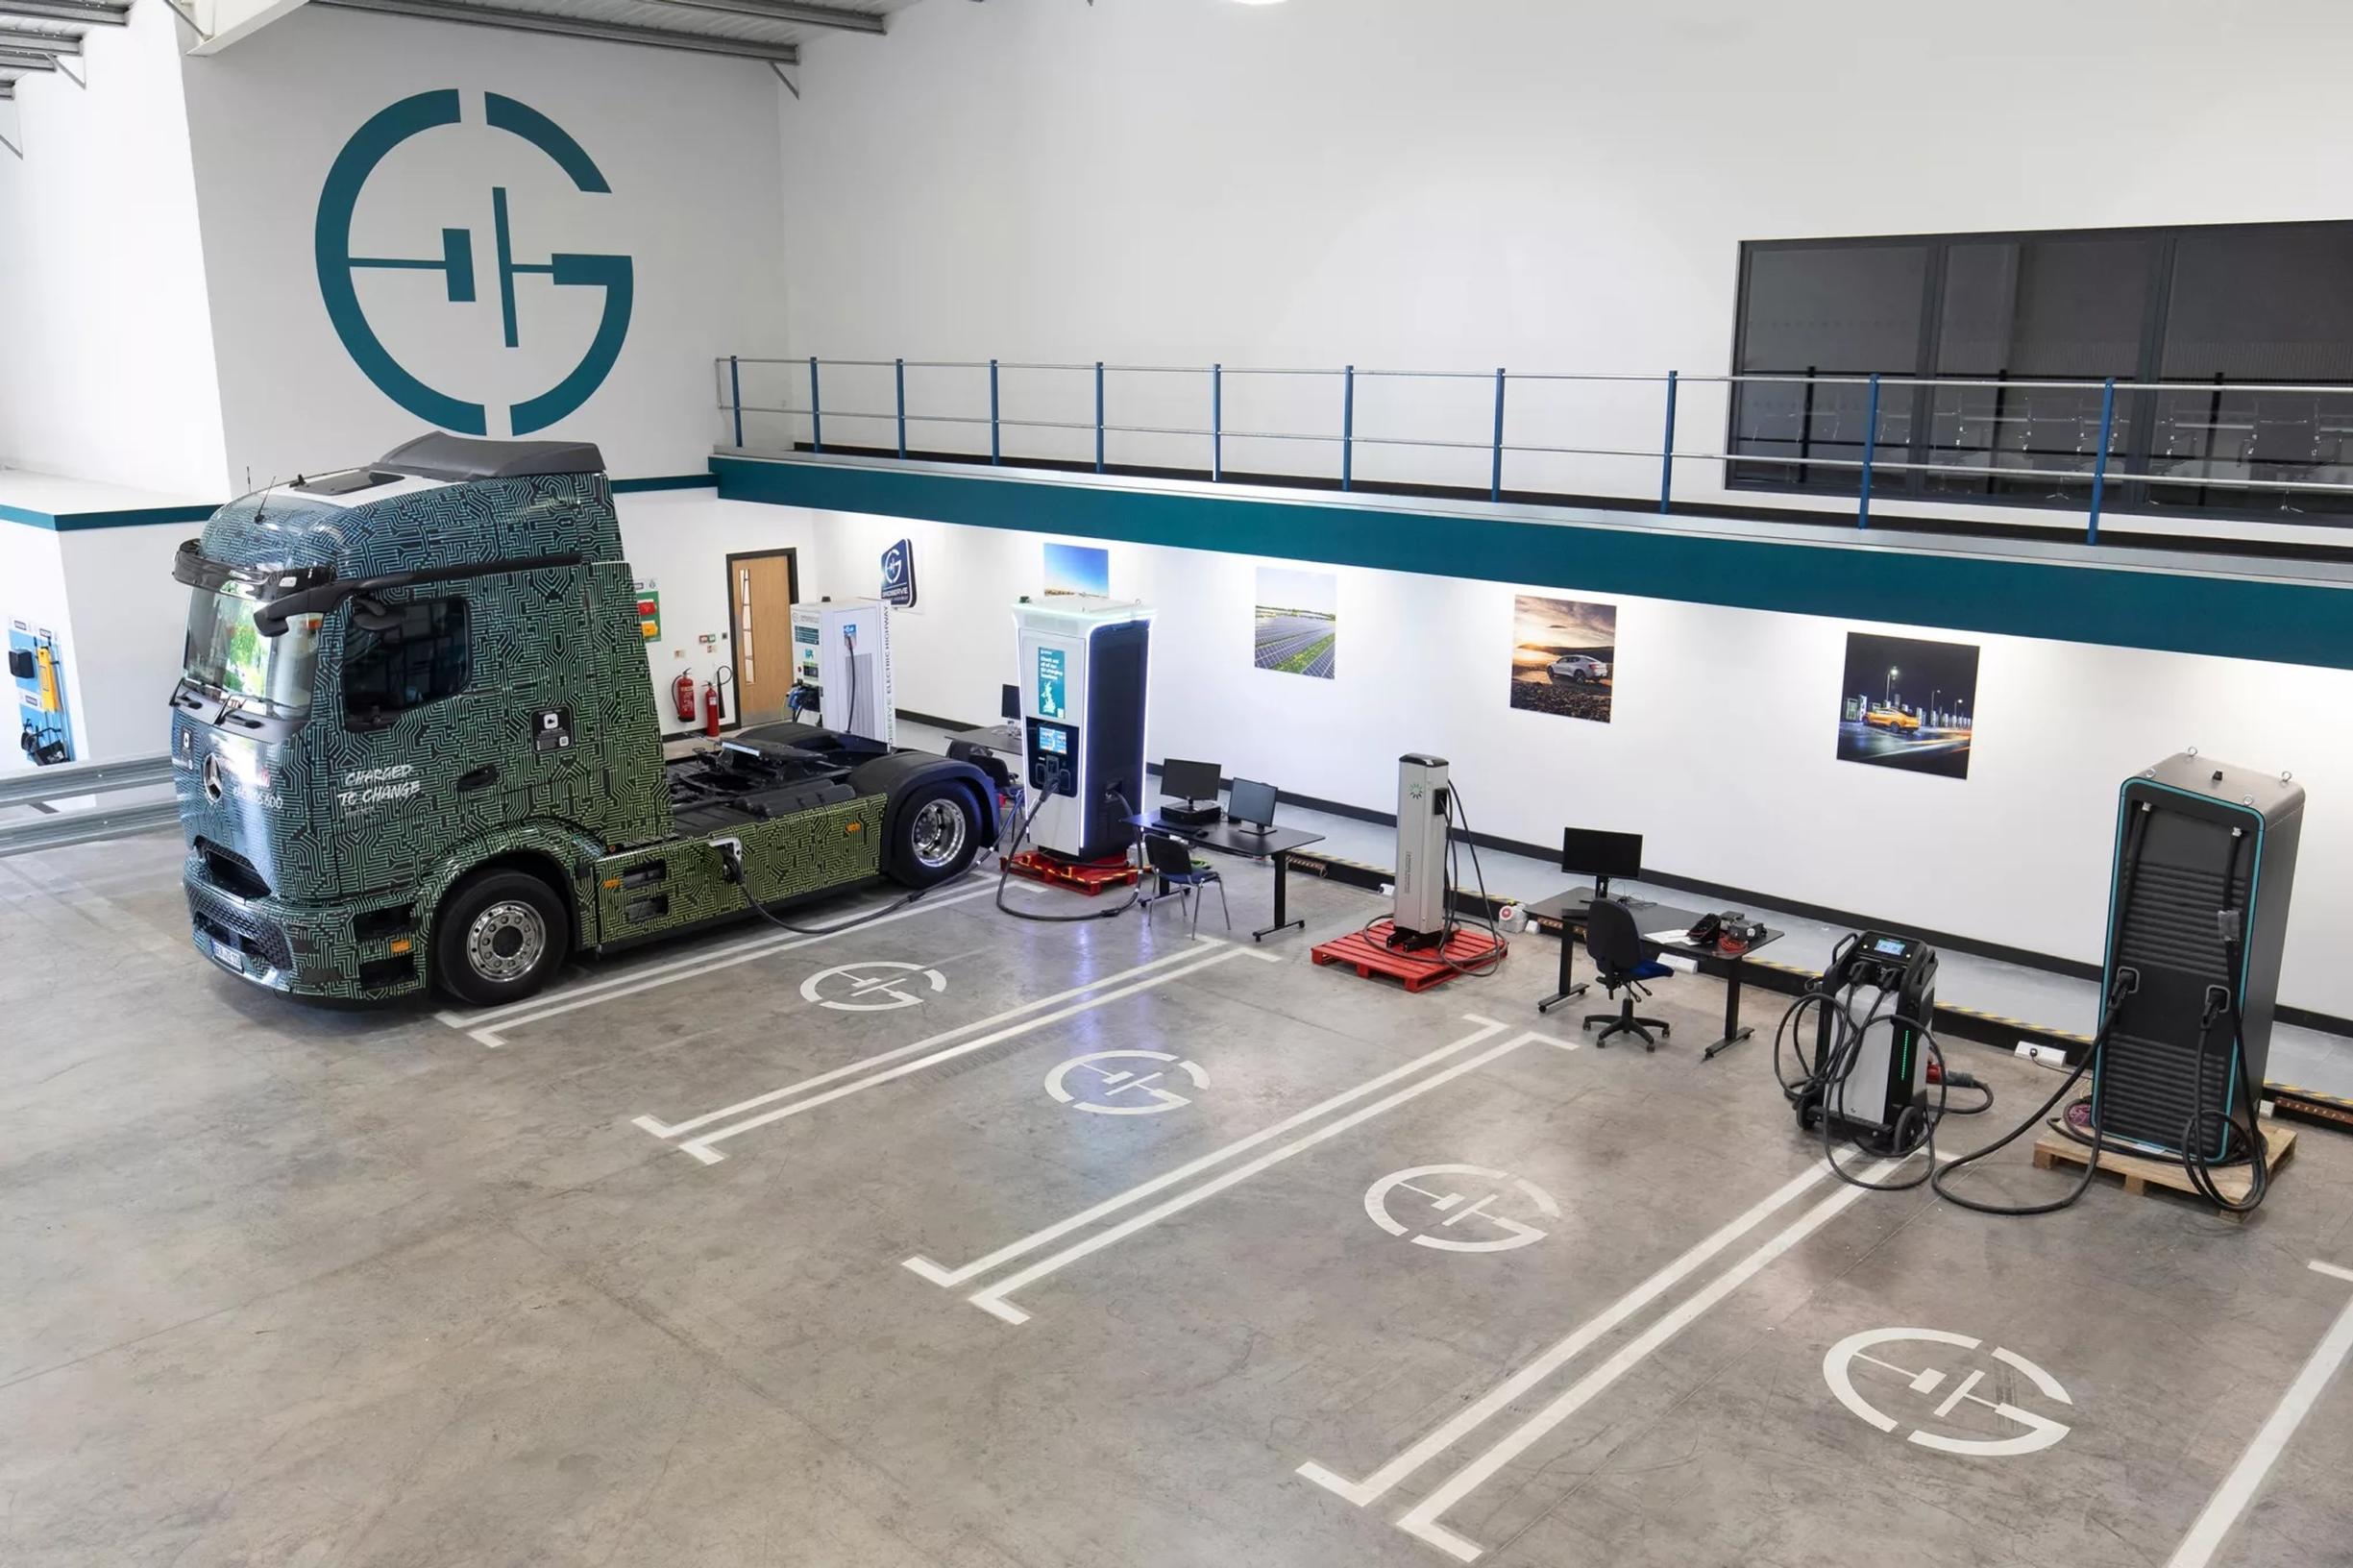 Electric Freightway to benefit from GRIDSERVE EV charging test lab